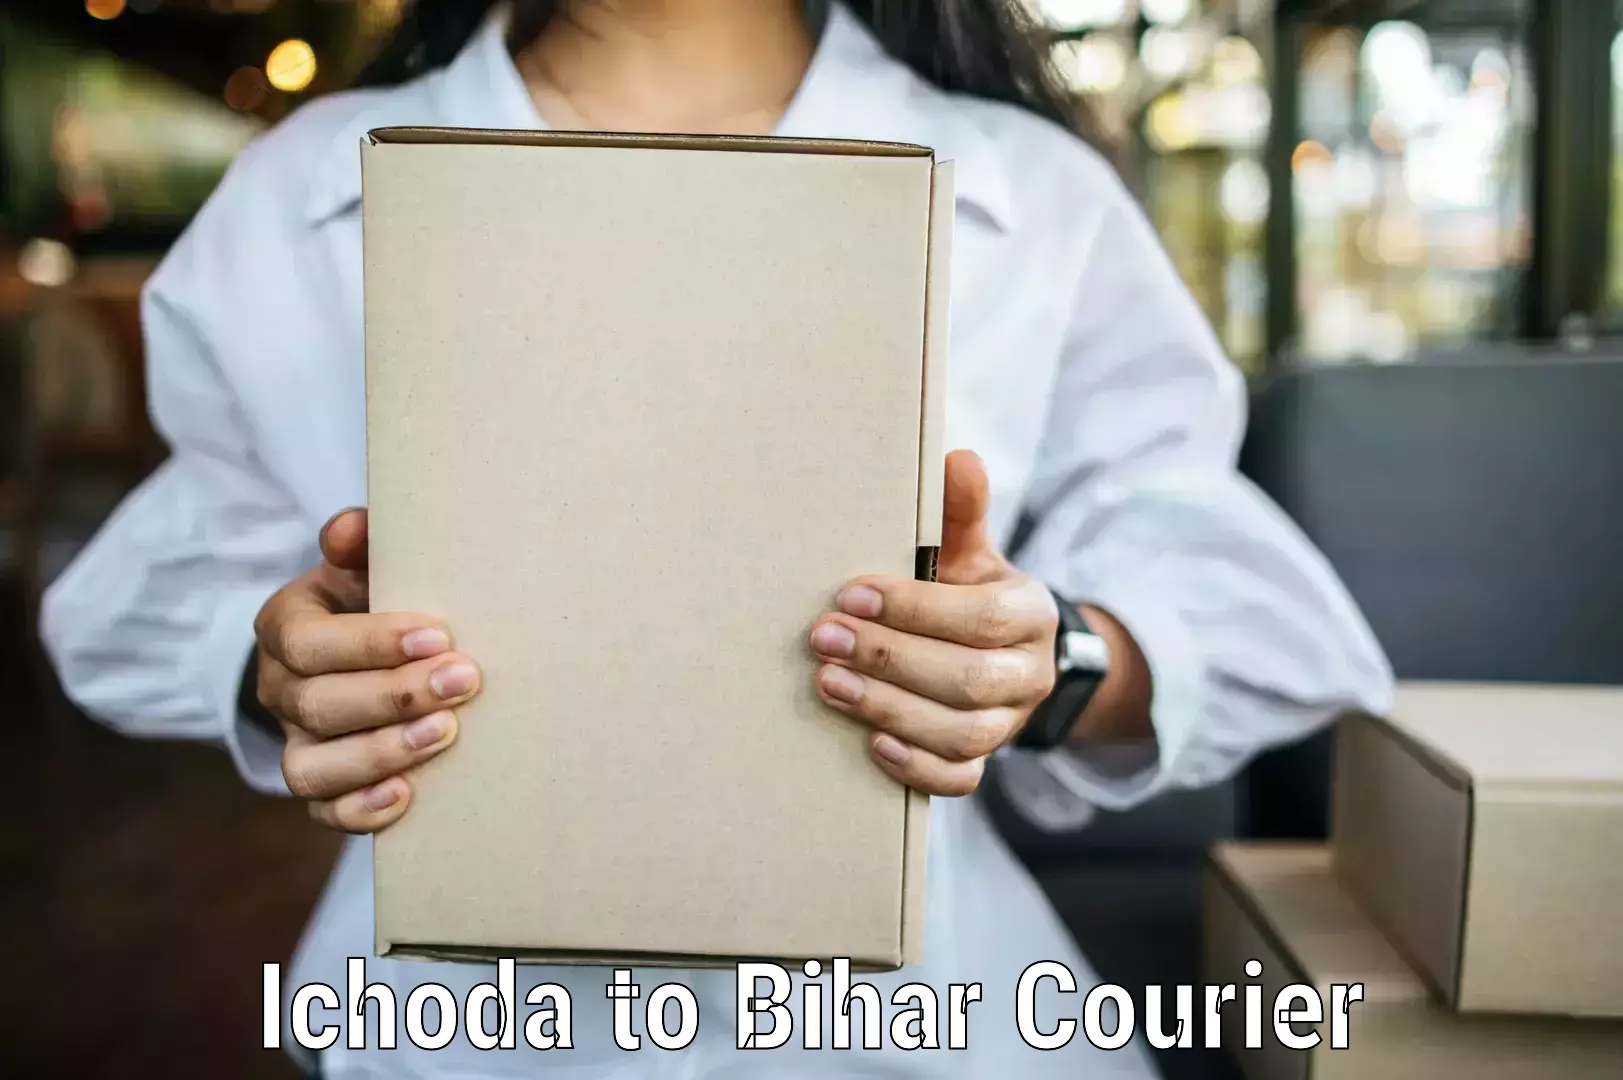 Multi-national courier services Ichoda to Ghogha